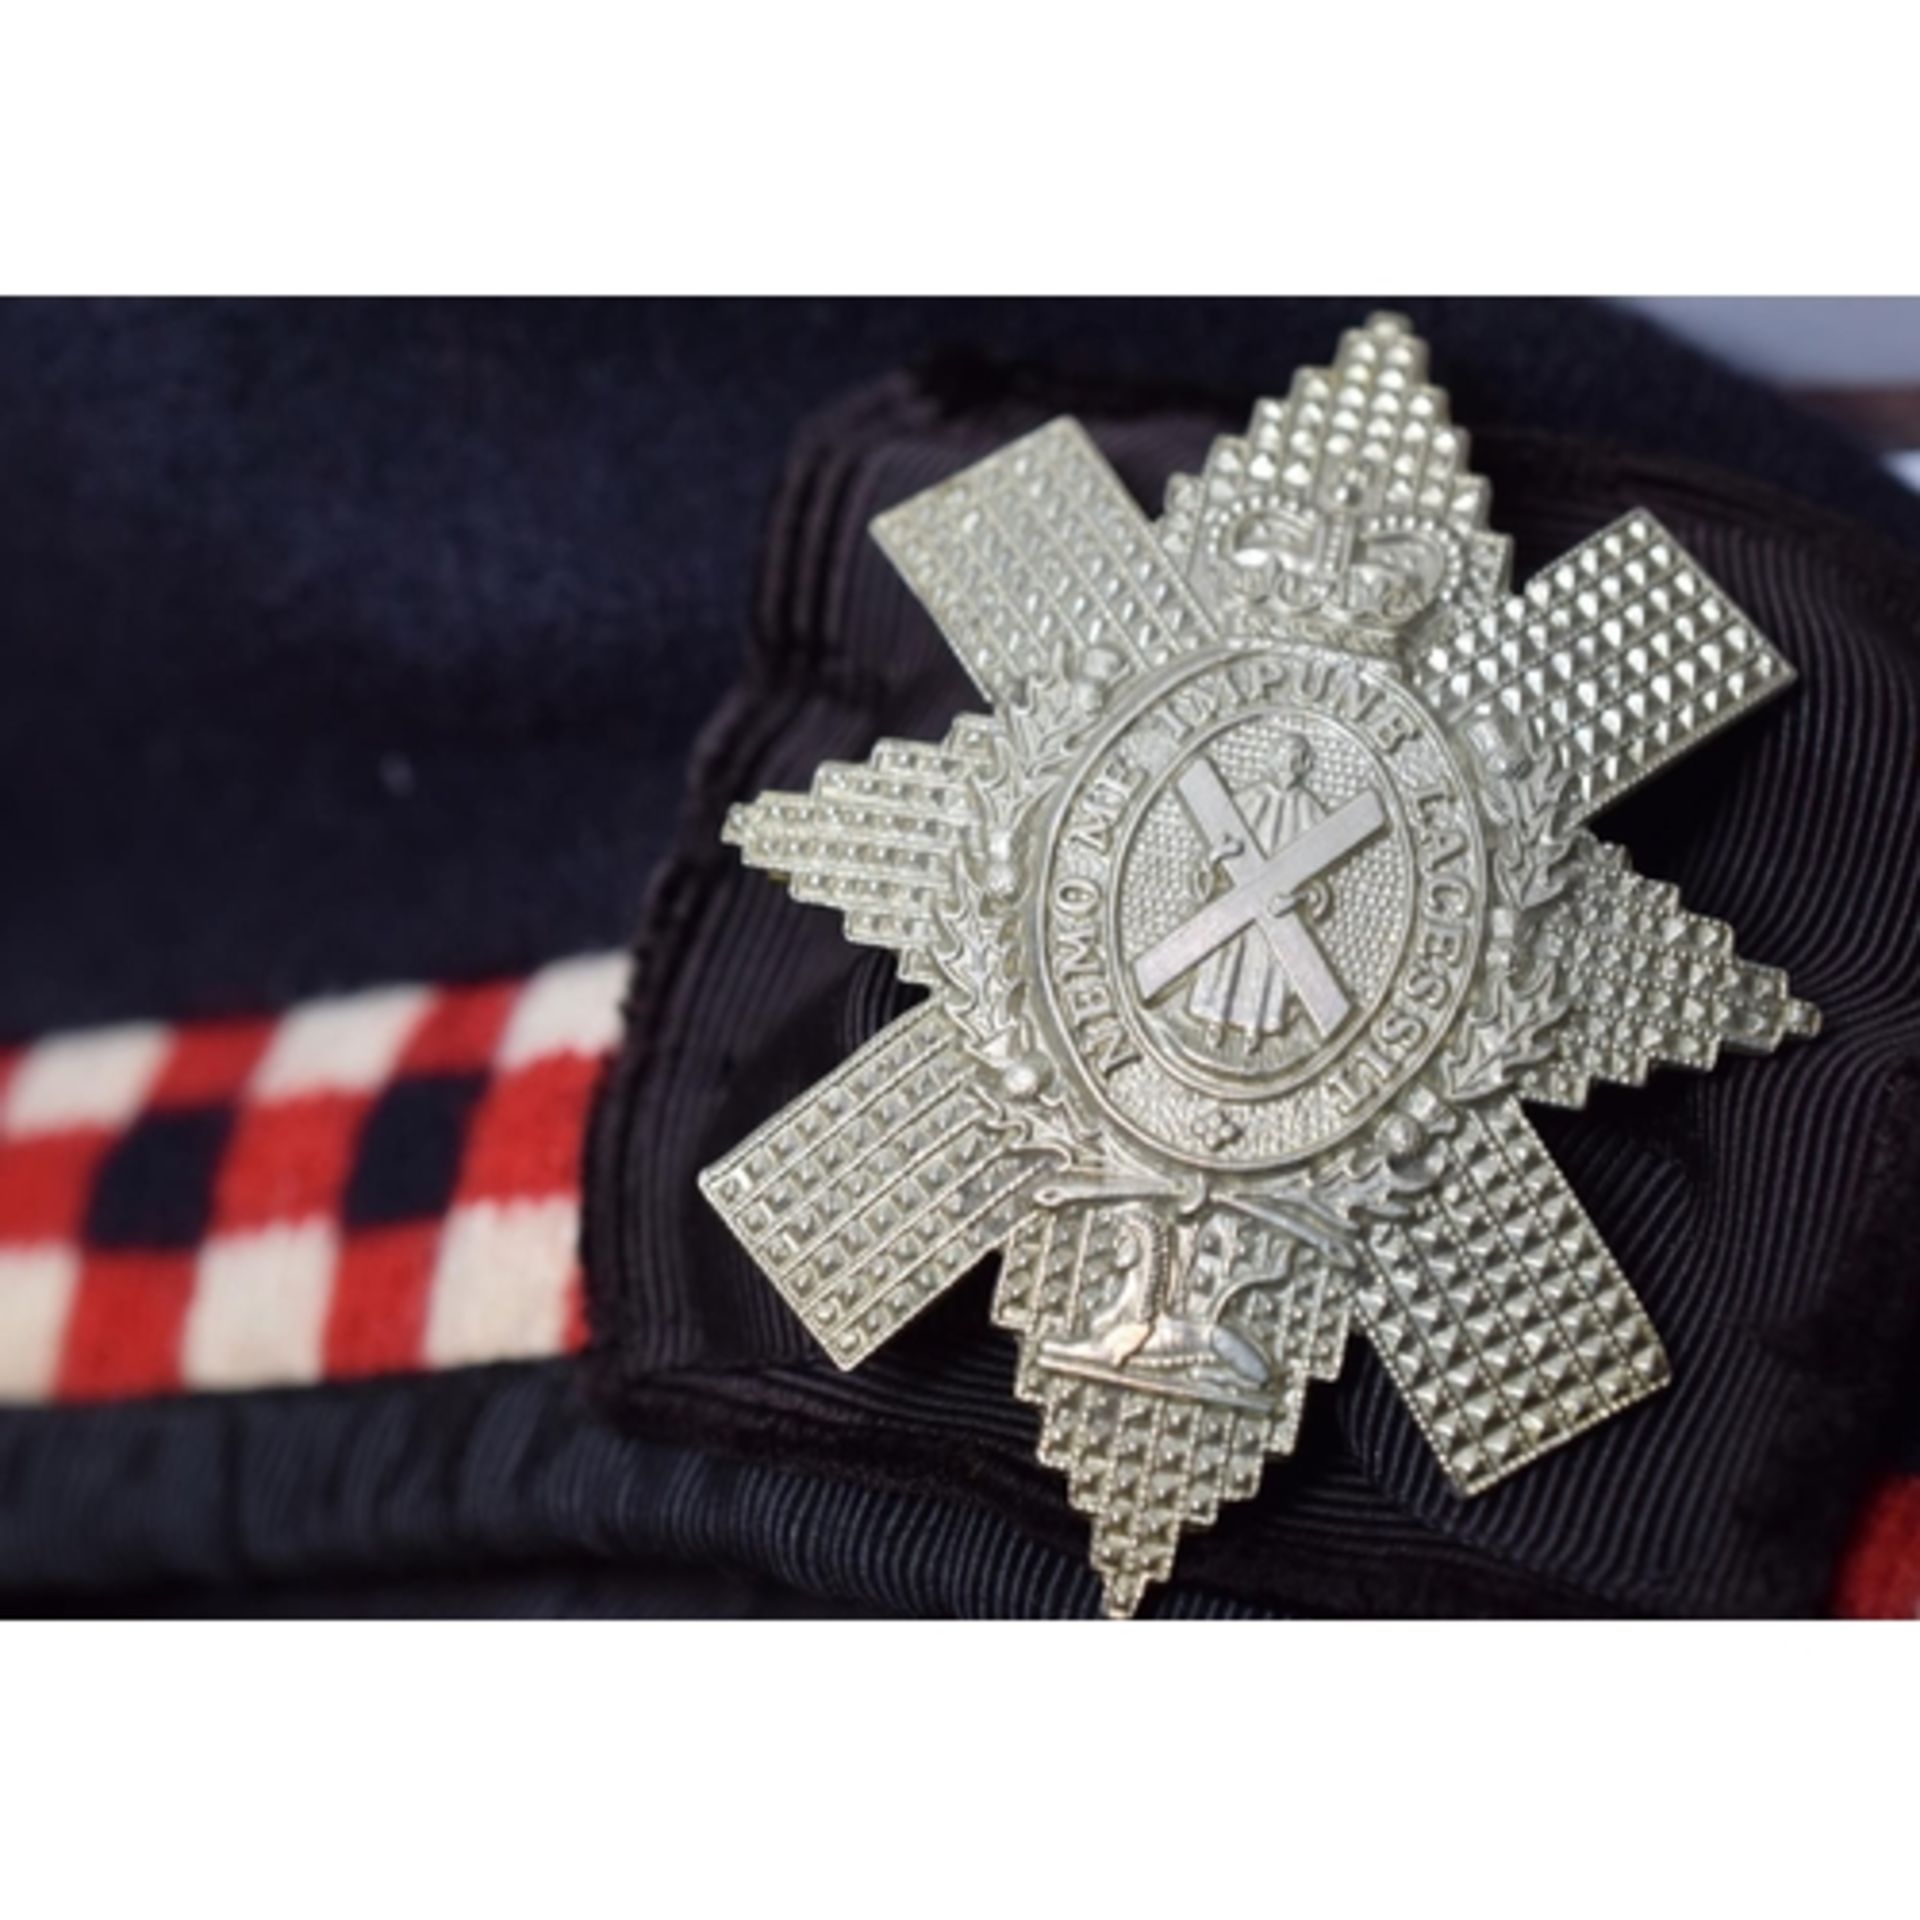 WW2 Balmoral Bonnet/Glengary With Black Watch Badge - Image 2 of 3